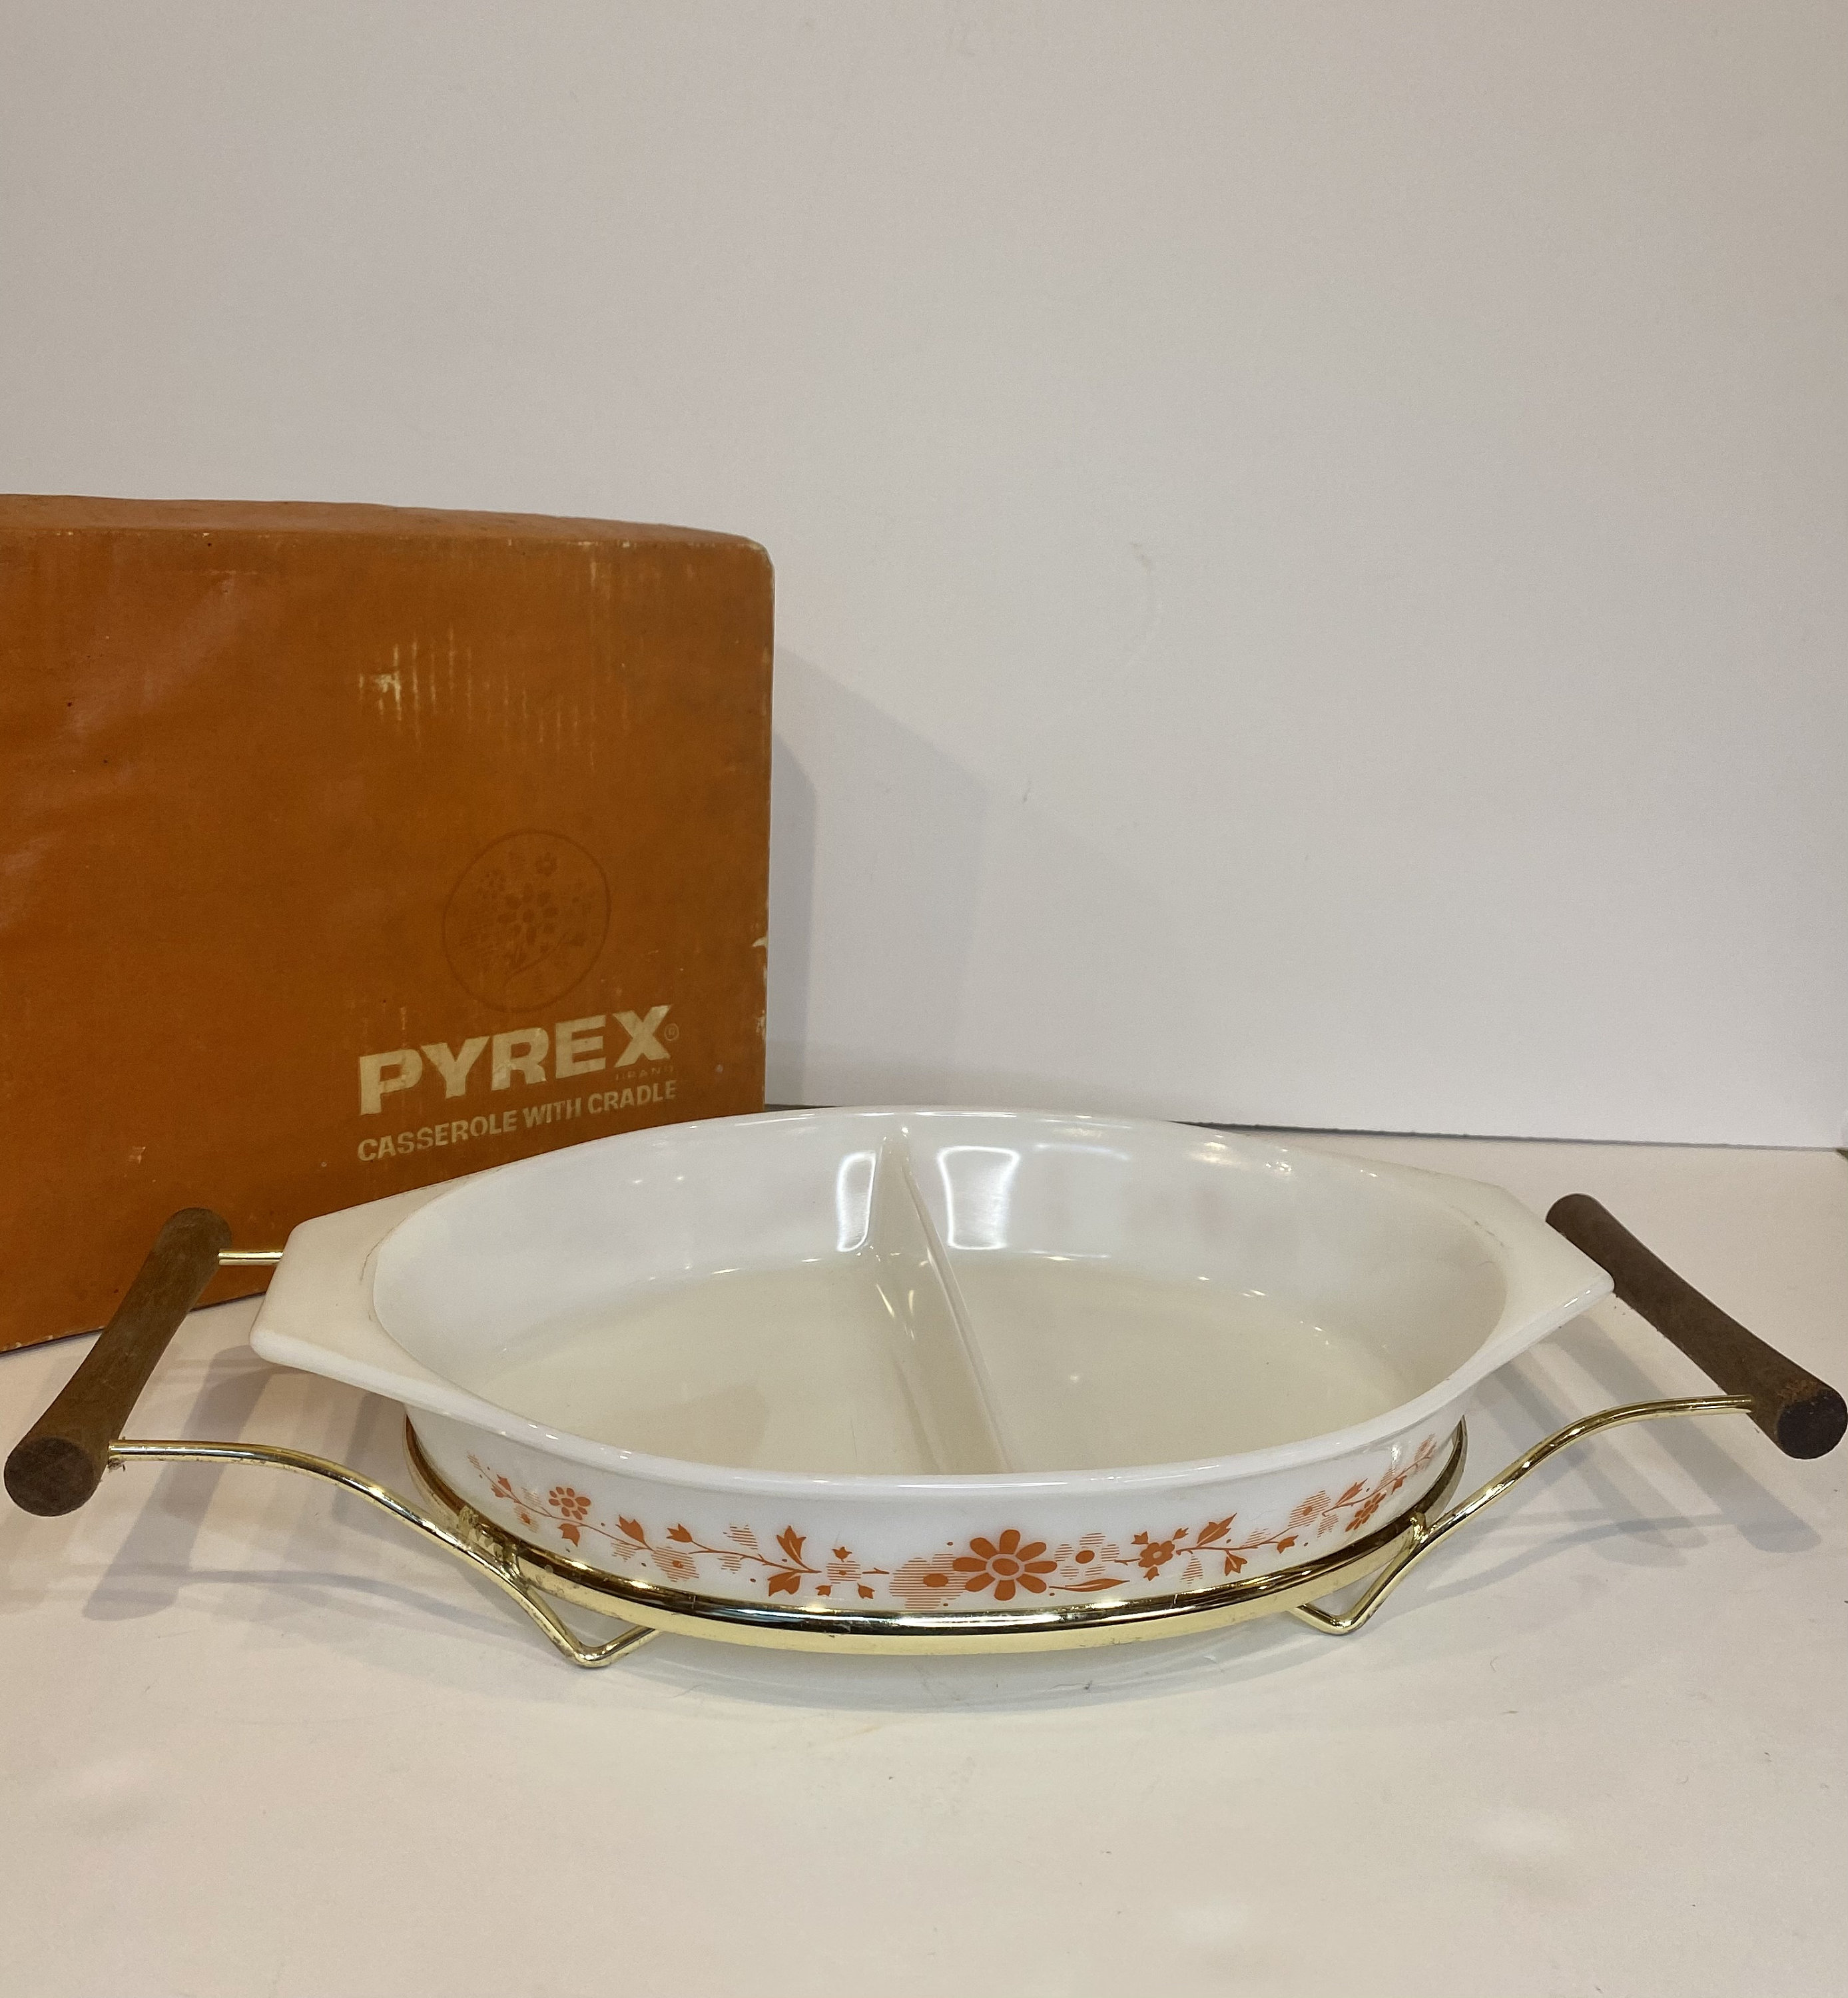 Floral Promotional Divided Dish w/ Cradle (1965) : Pyrex Love